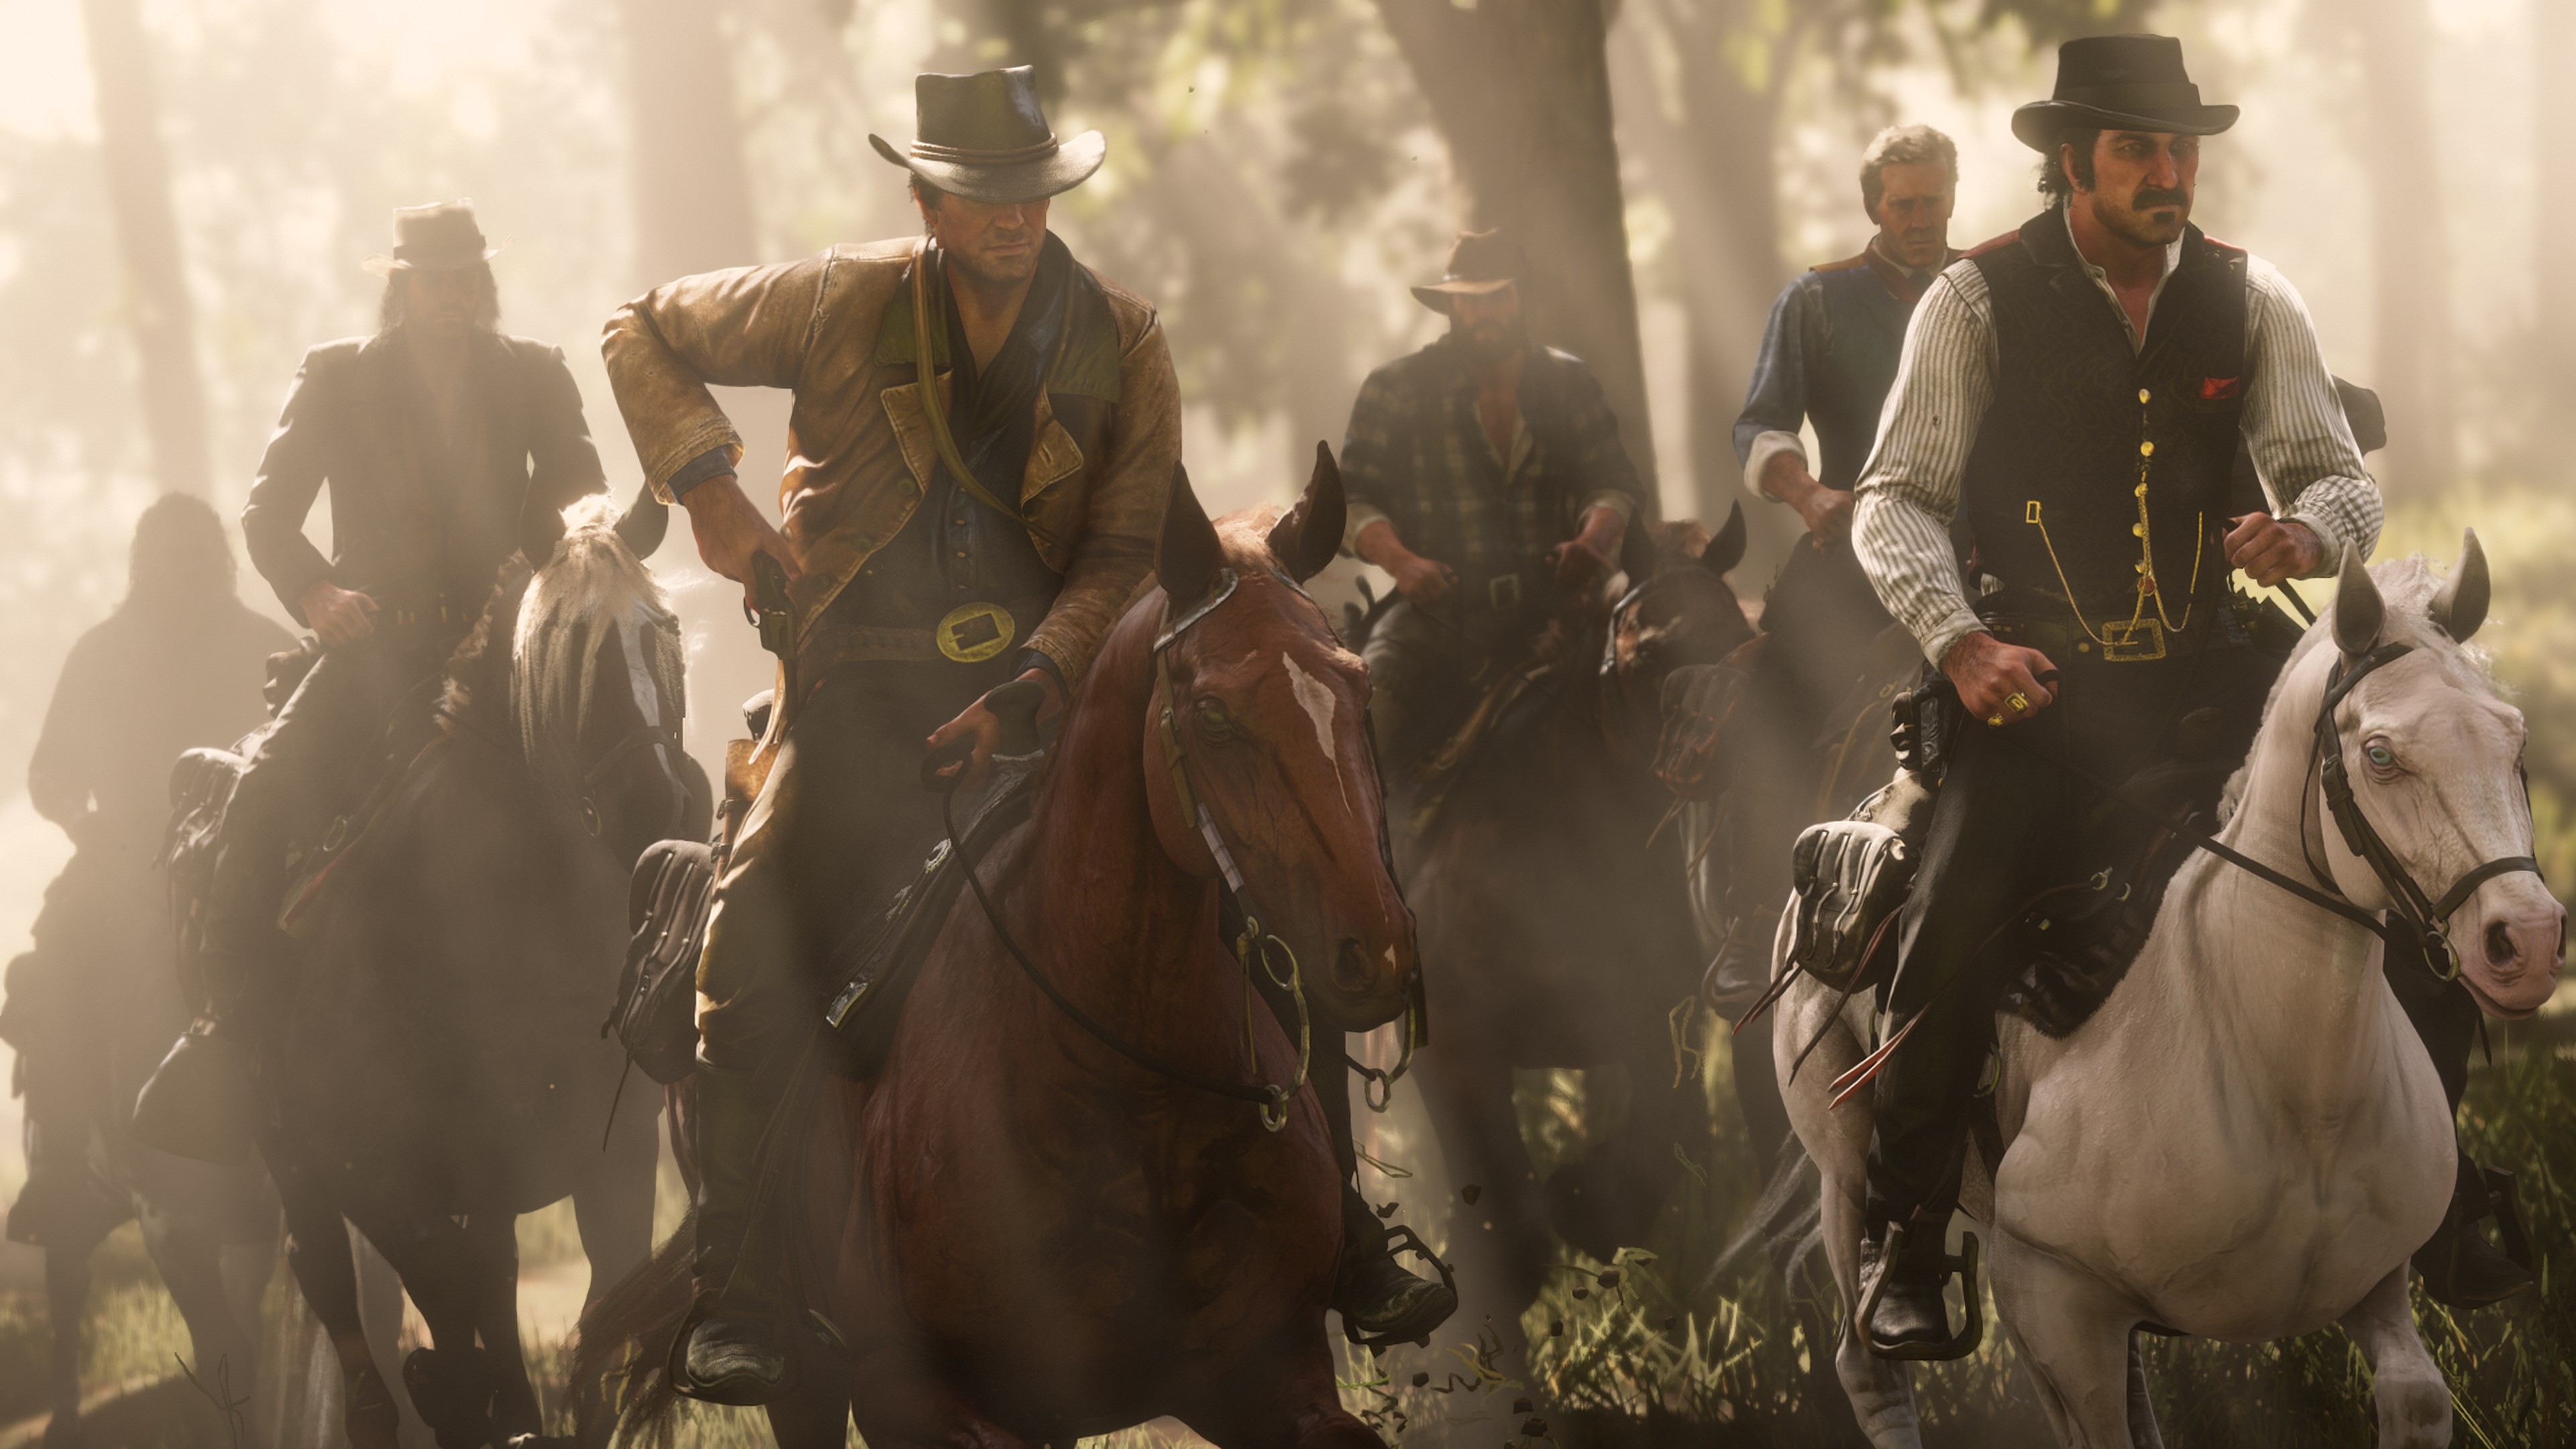 Red Dead Redemption 2: Story Mode and Ultimate Edition Content (UK